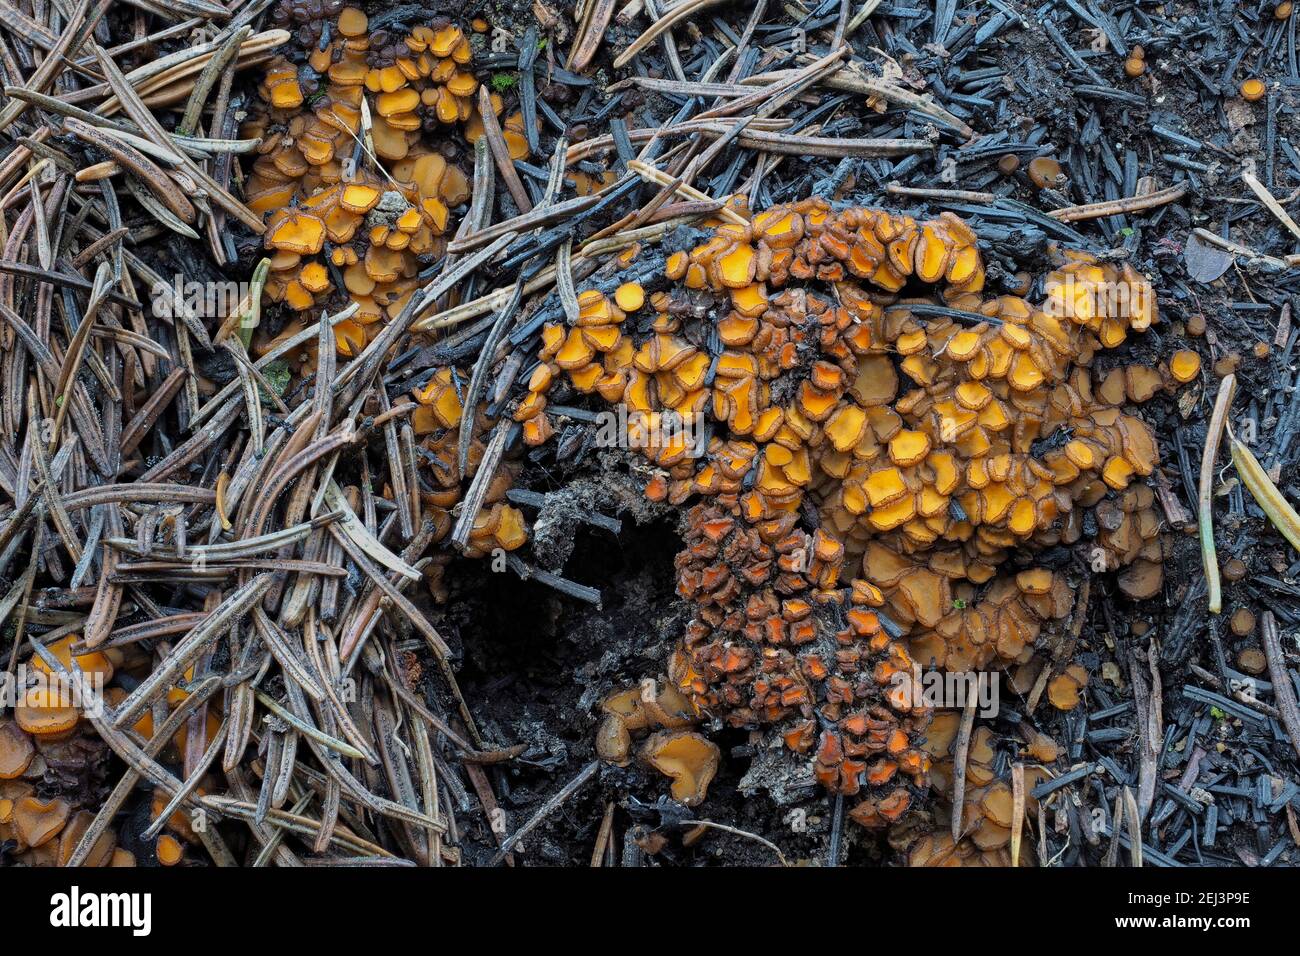 The Anthracobia nitida is an inedible mushroom , an intresting photo Stock Photo